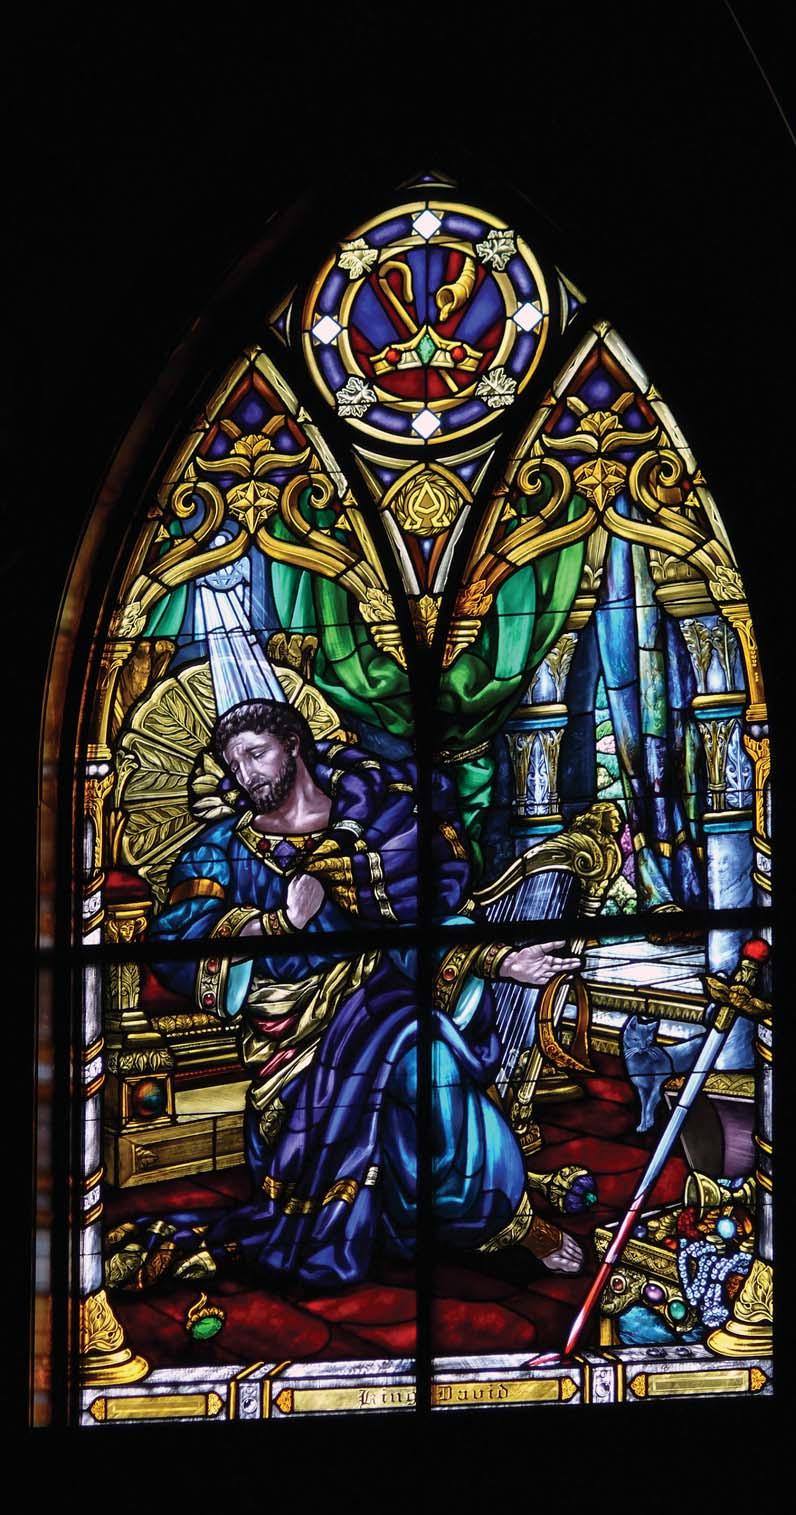 adultery with Bathsheba. This window presents symbols of wealth in the gold and jewels, of power in the king s scepter, of violence in the bloody sword, and of lust in the black cat.